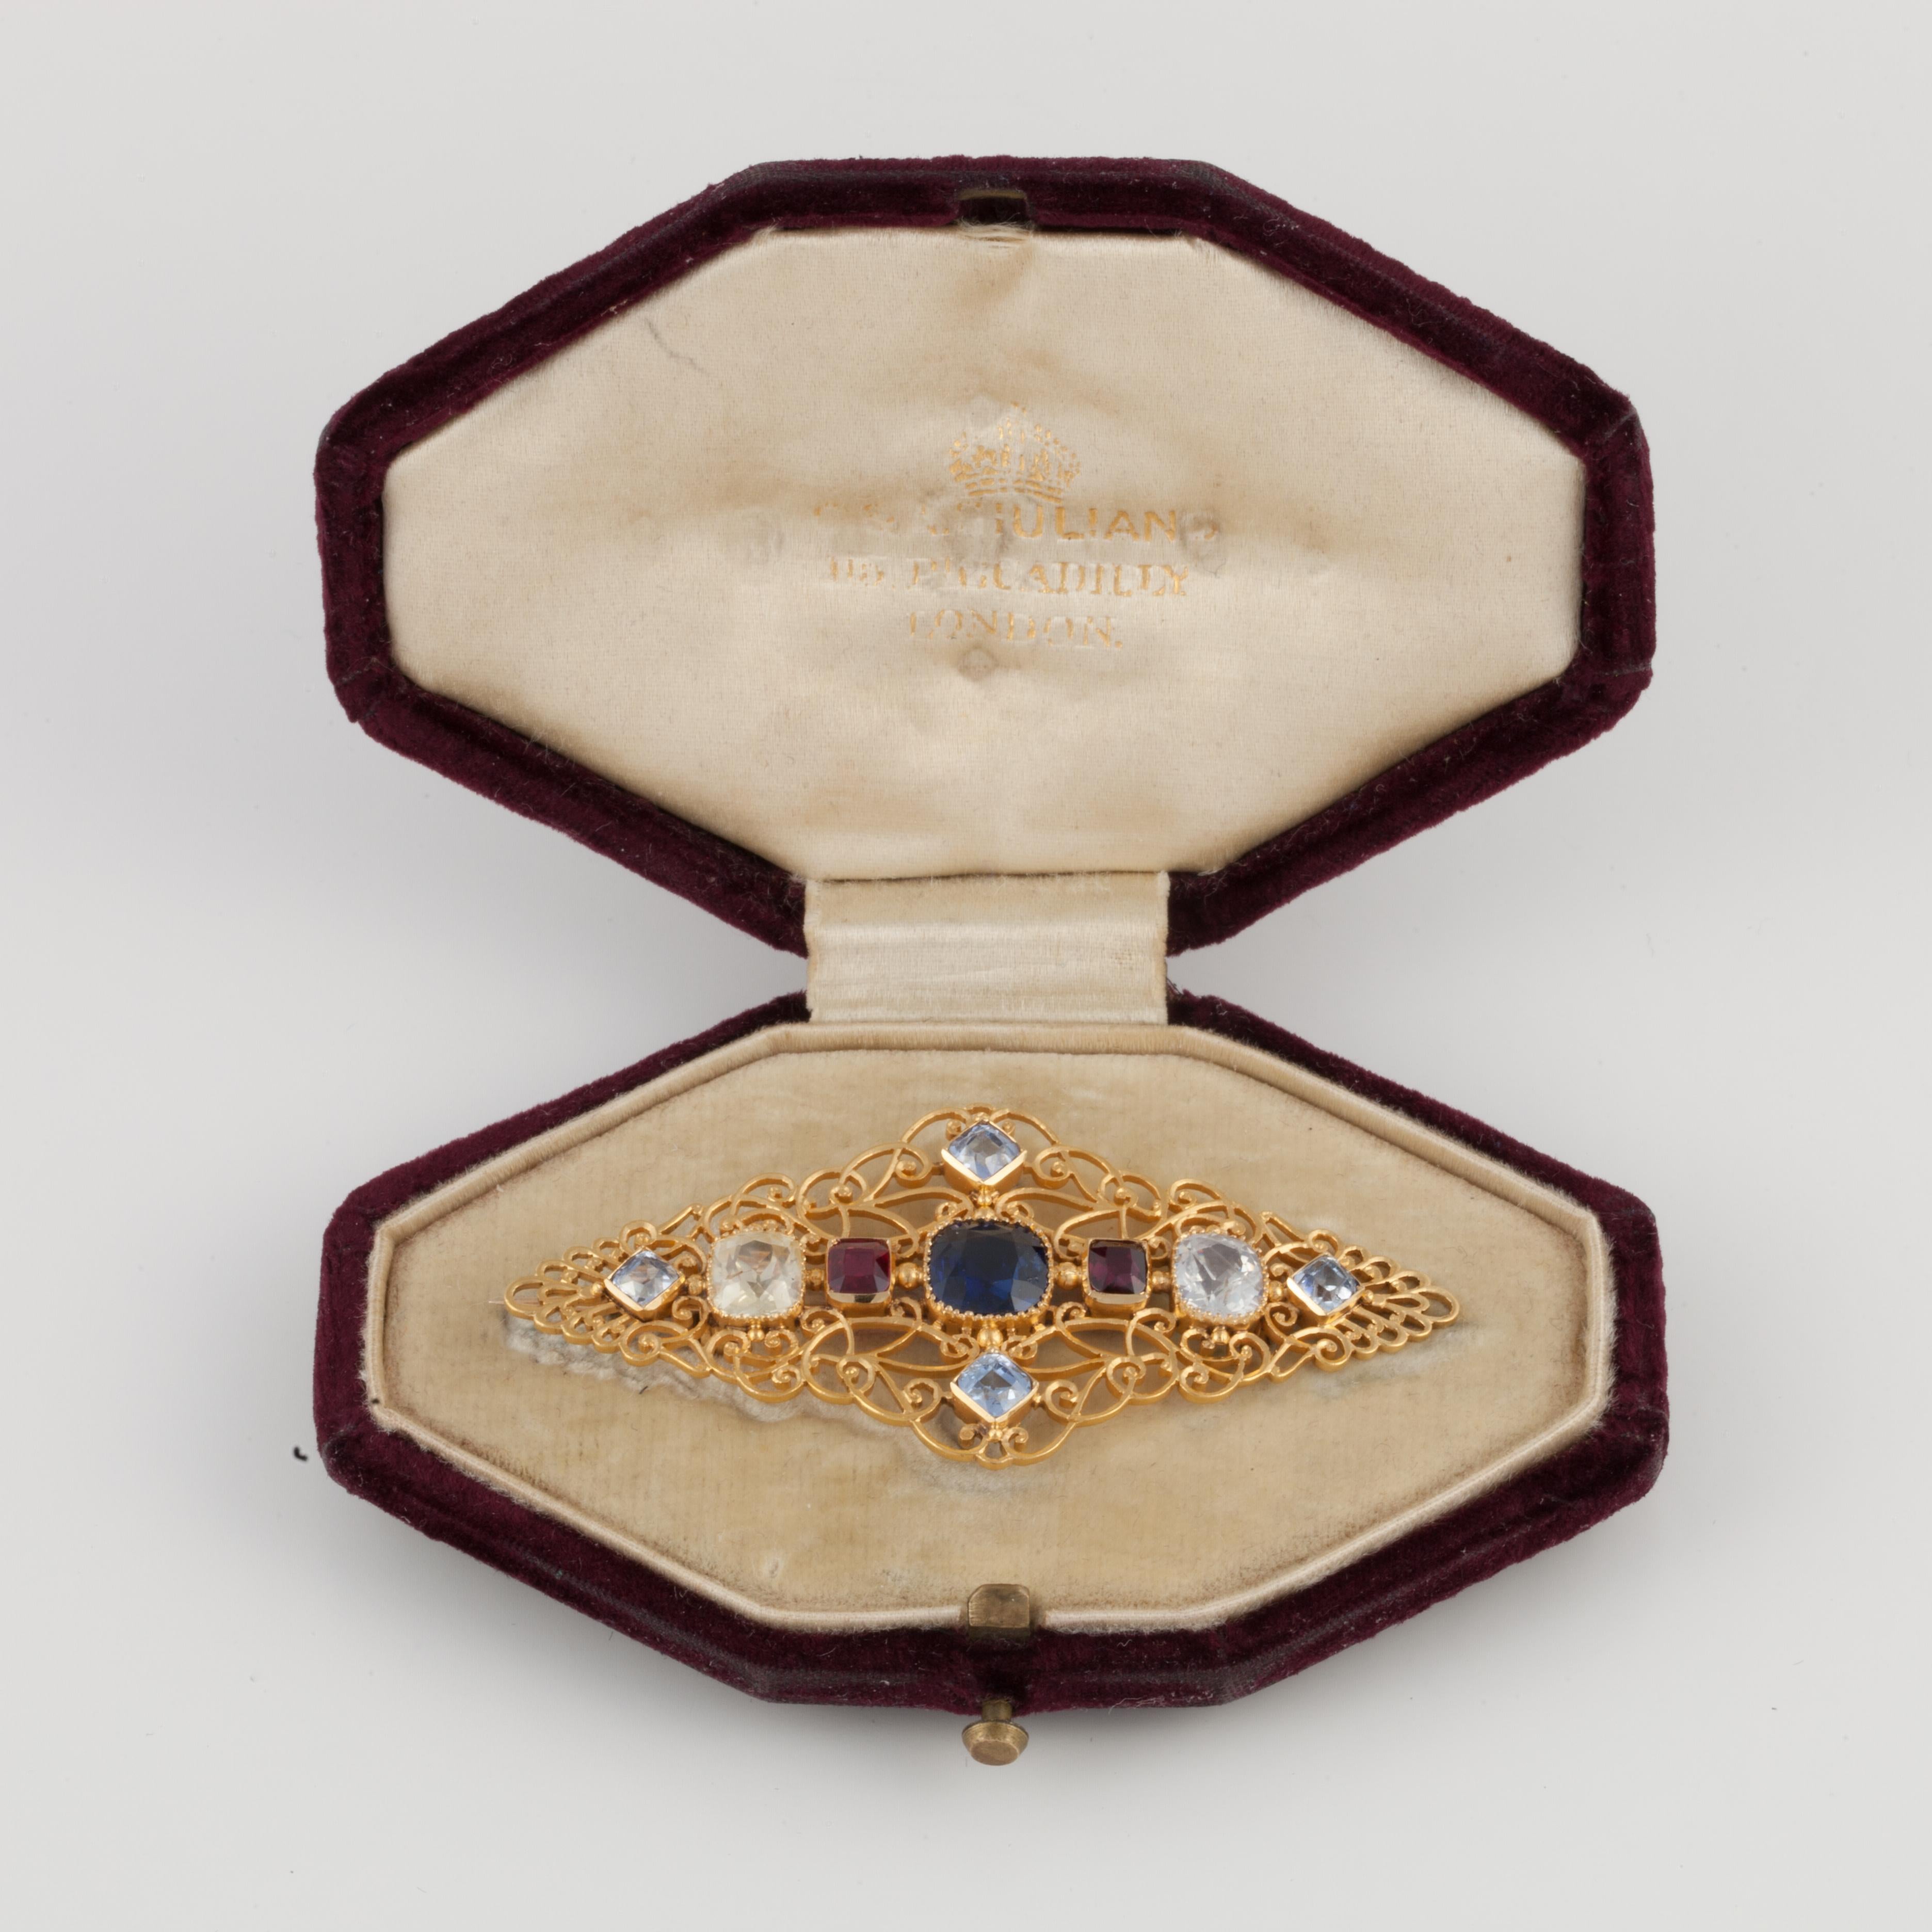 Victorian Carlo Giuliano 18K yellow gold sapphire and ruby pin featuring his signature gold open-work. The pin contains two rubies that total 0.70 carats, no treatment, Thailand origin, accompanied by a GIA report.  There are seven multi-colored